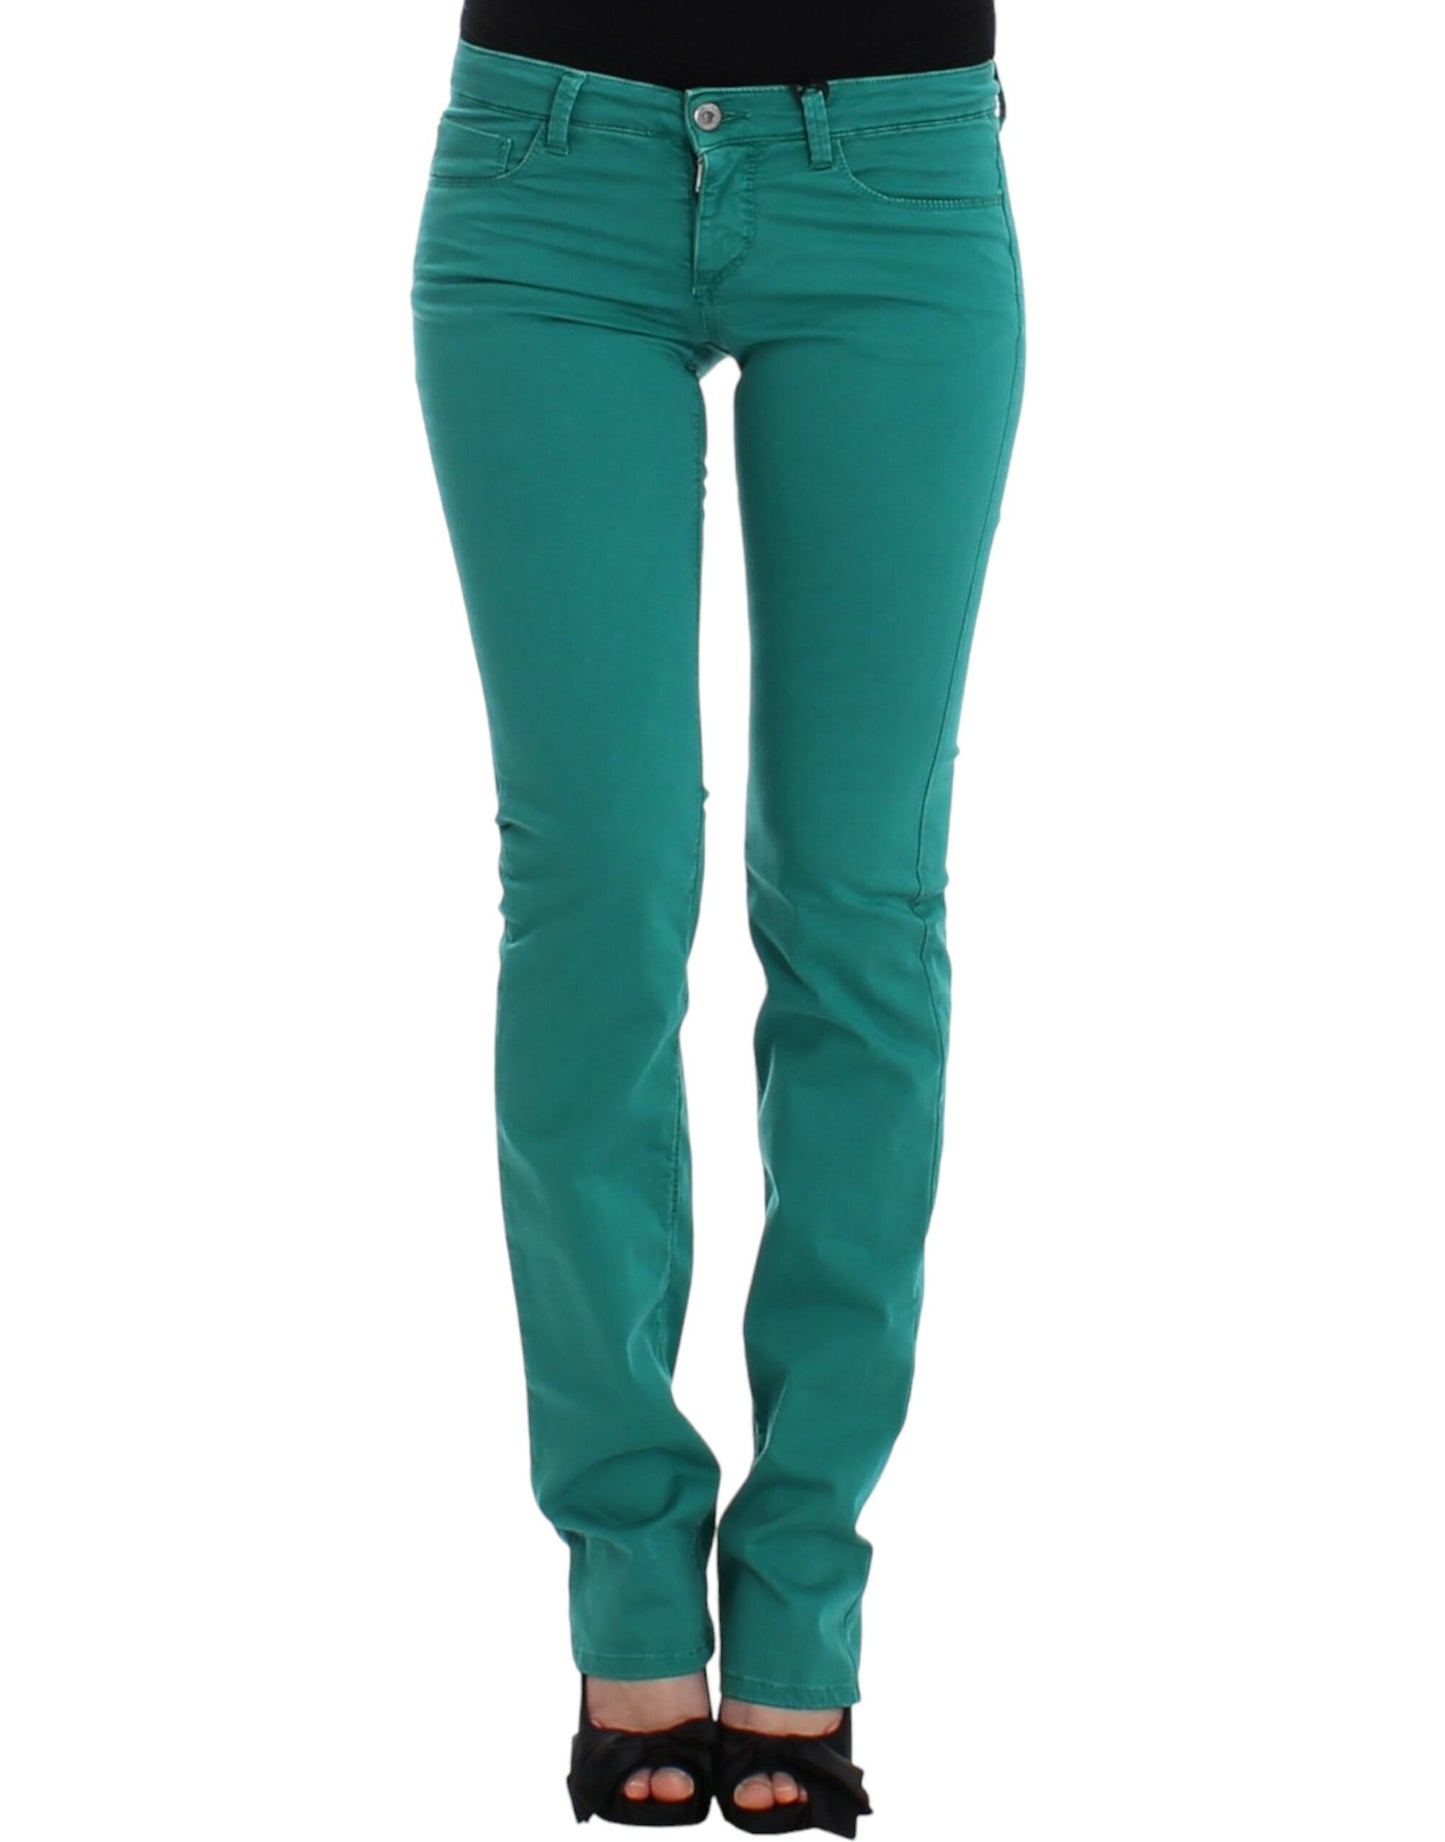 Chic Green Straight Leg Jeans for Sophisticated Style